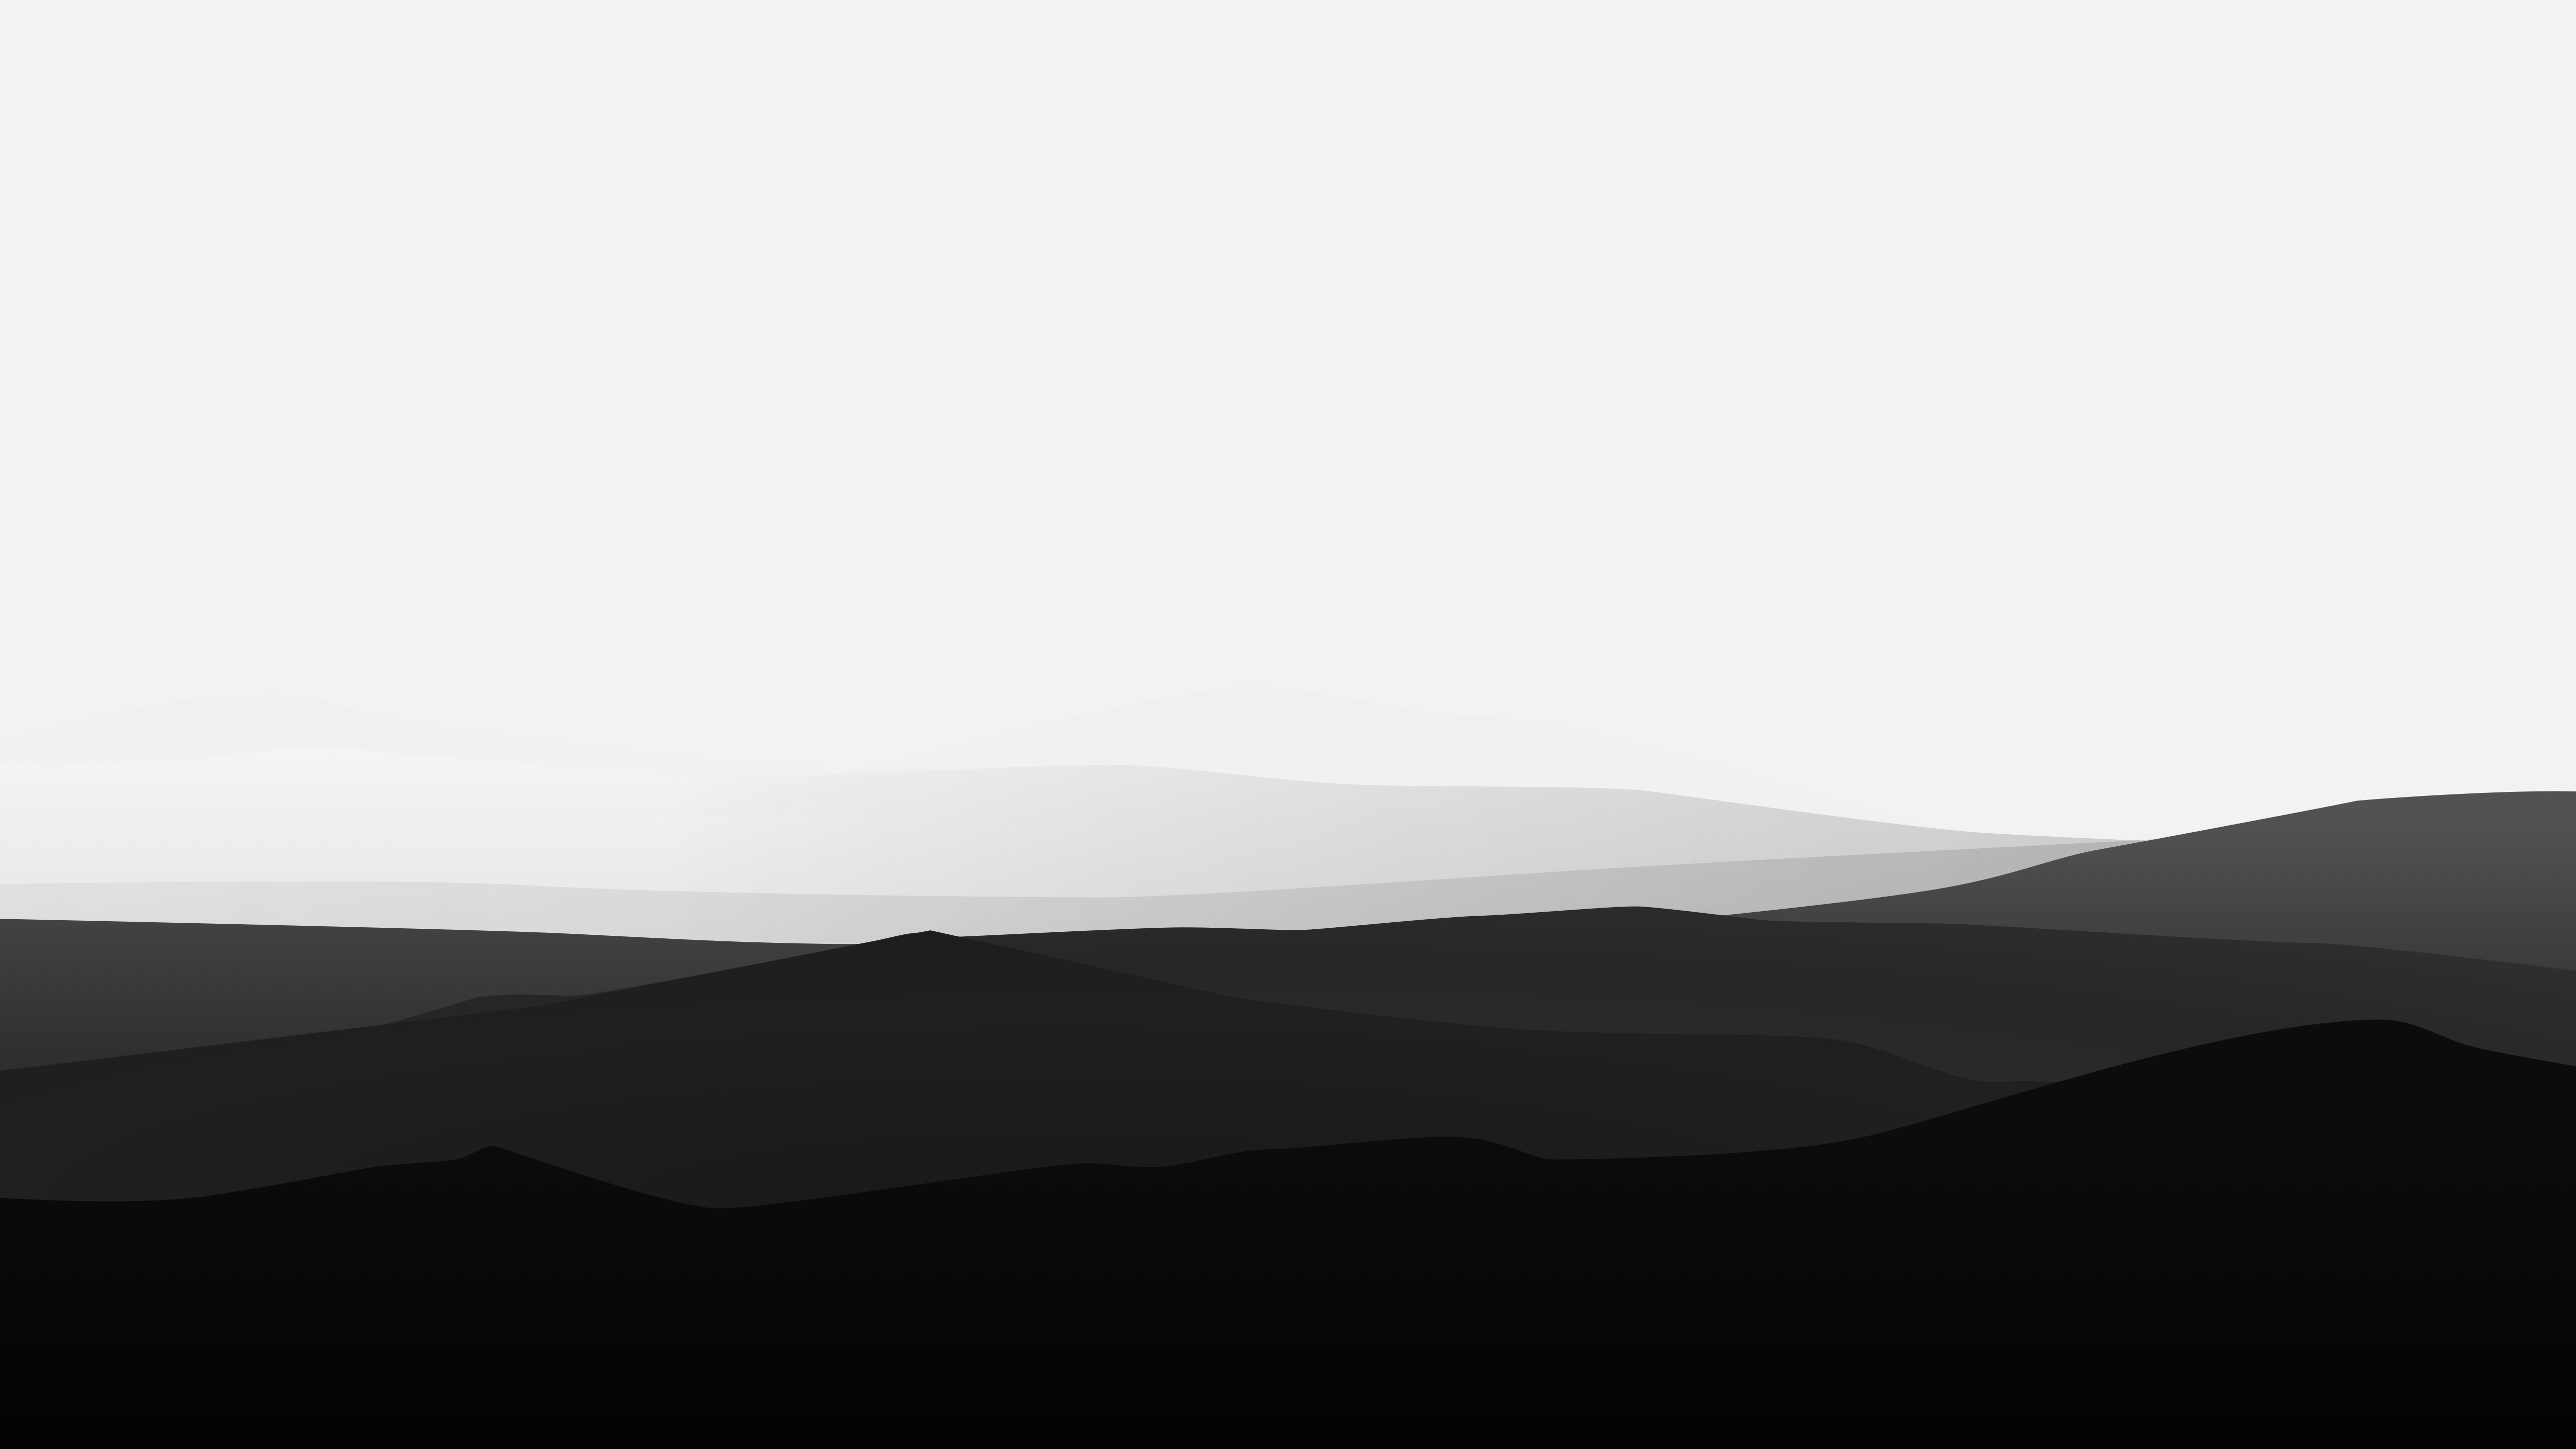 Minimalist Mountains Black And White, HD Artist, 4k Wallpapers, Images